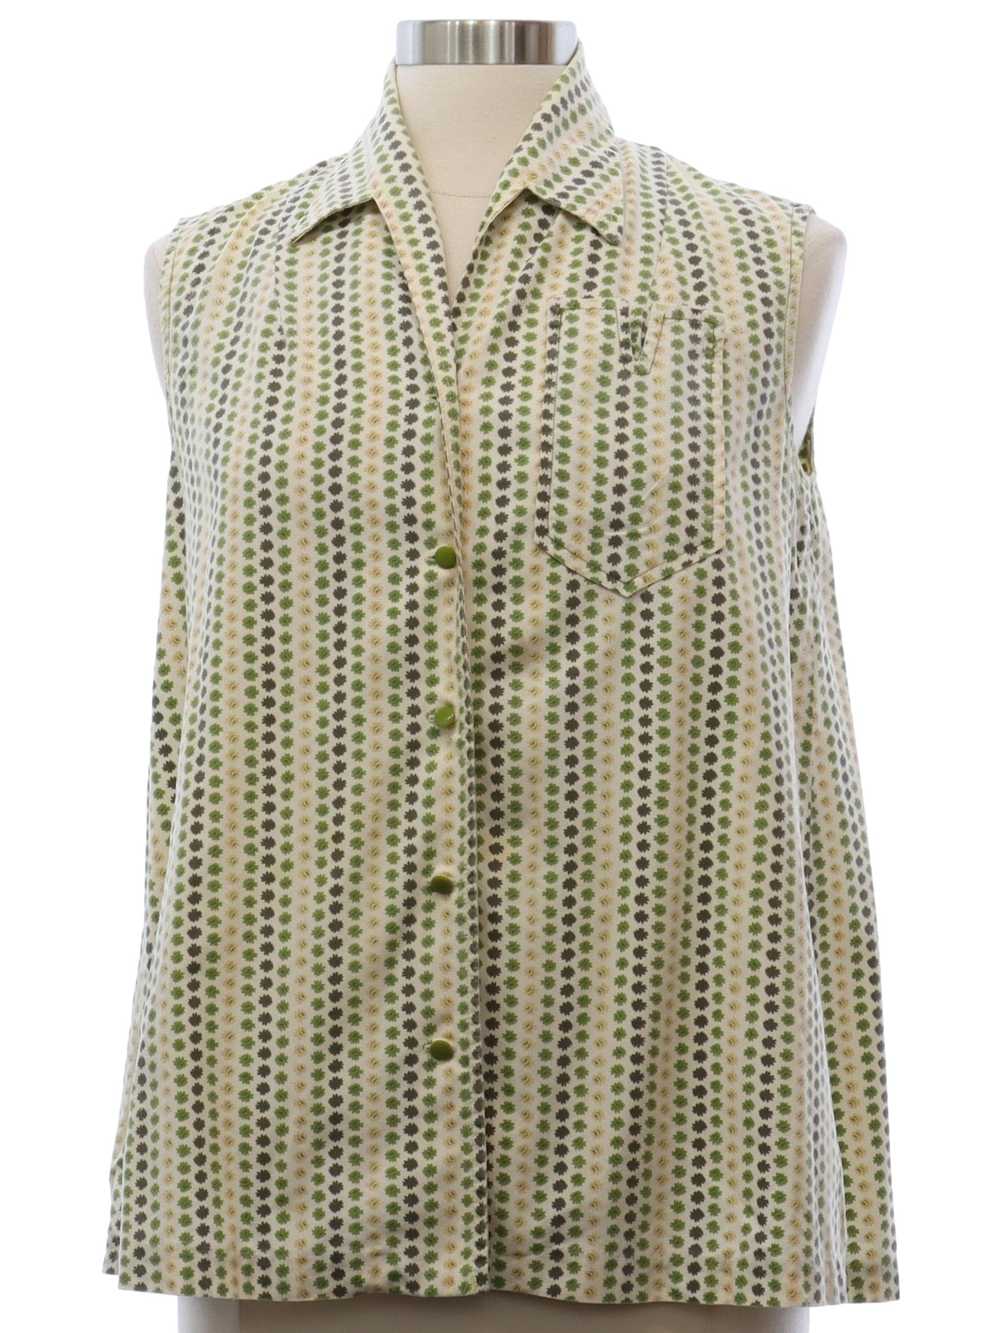 1960's Chas. L. Lewis Womens Shirt - image 1